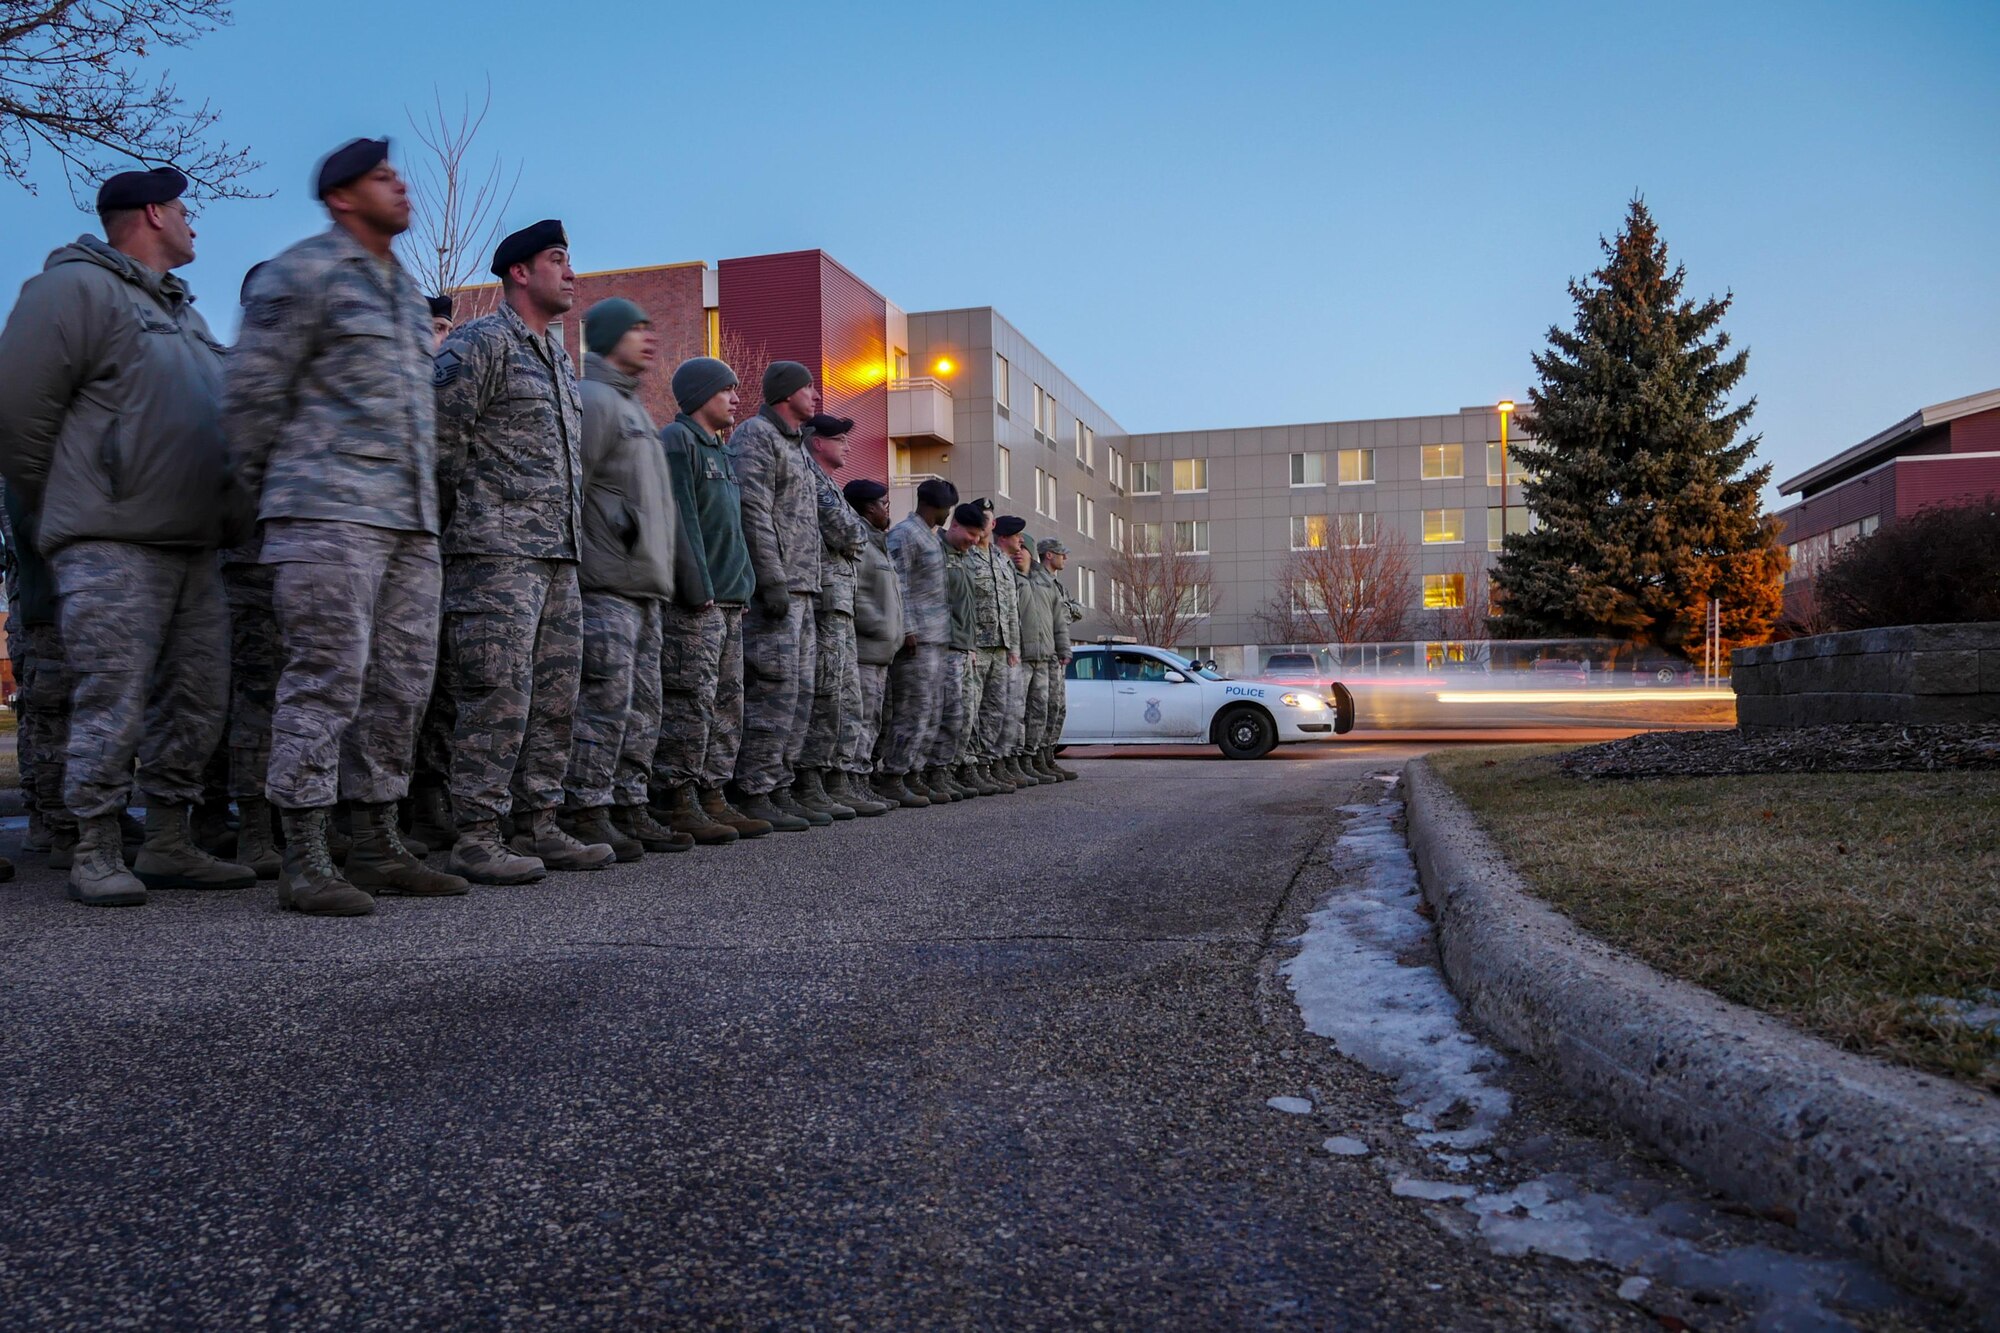 Defenders of the 934th Security Forces Squadron honor Old Glory during Reveille on Feb 12, 2017 signaling the official start of the duty day. (U.S. Air Force photo by Staff Sgt. Corban Lundborg) 
